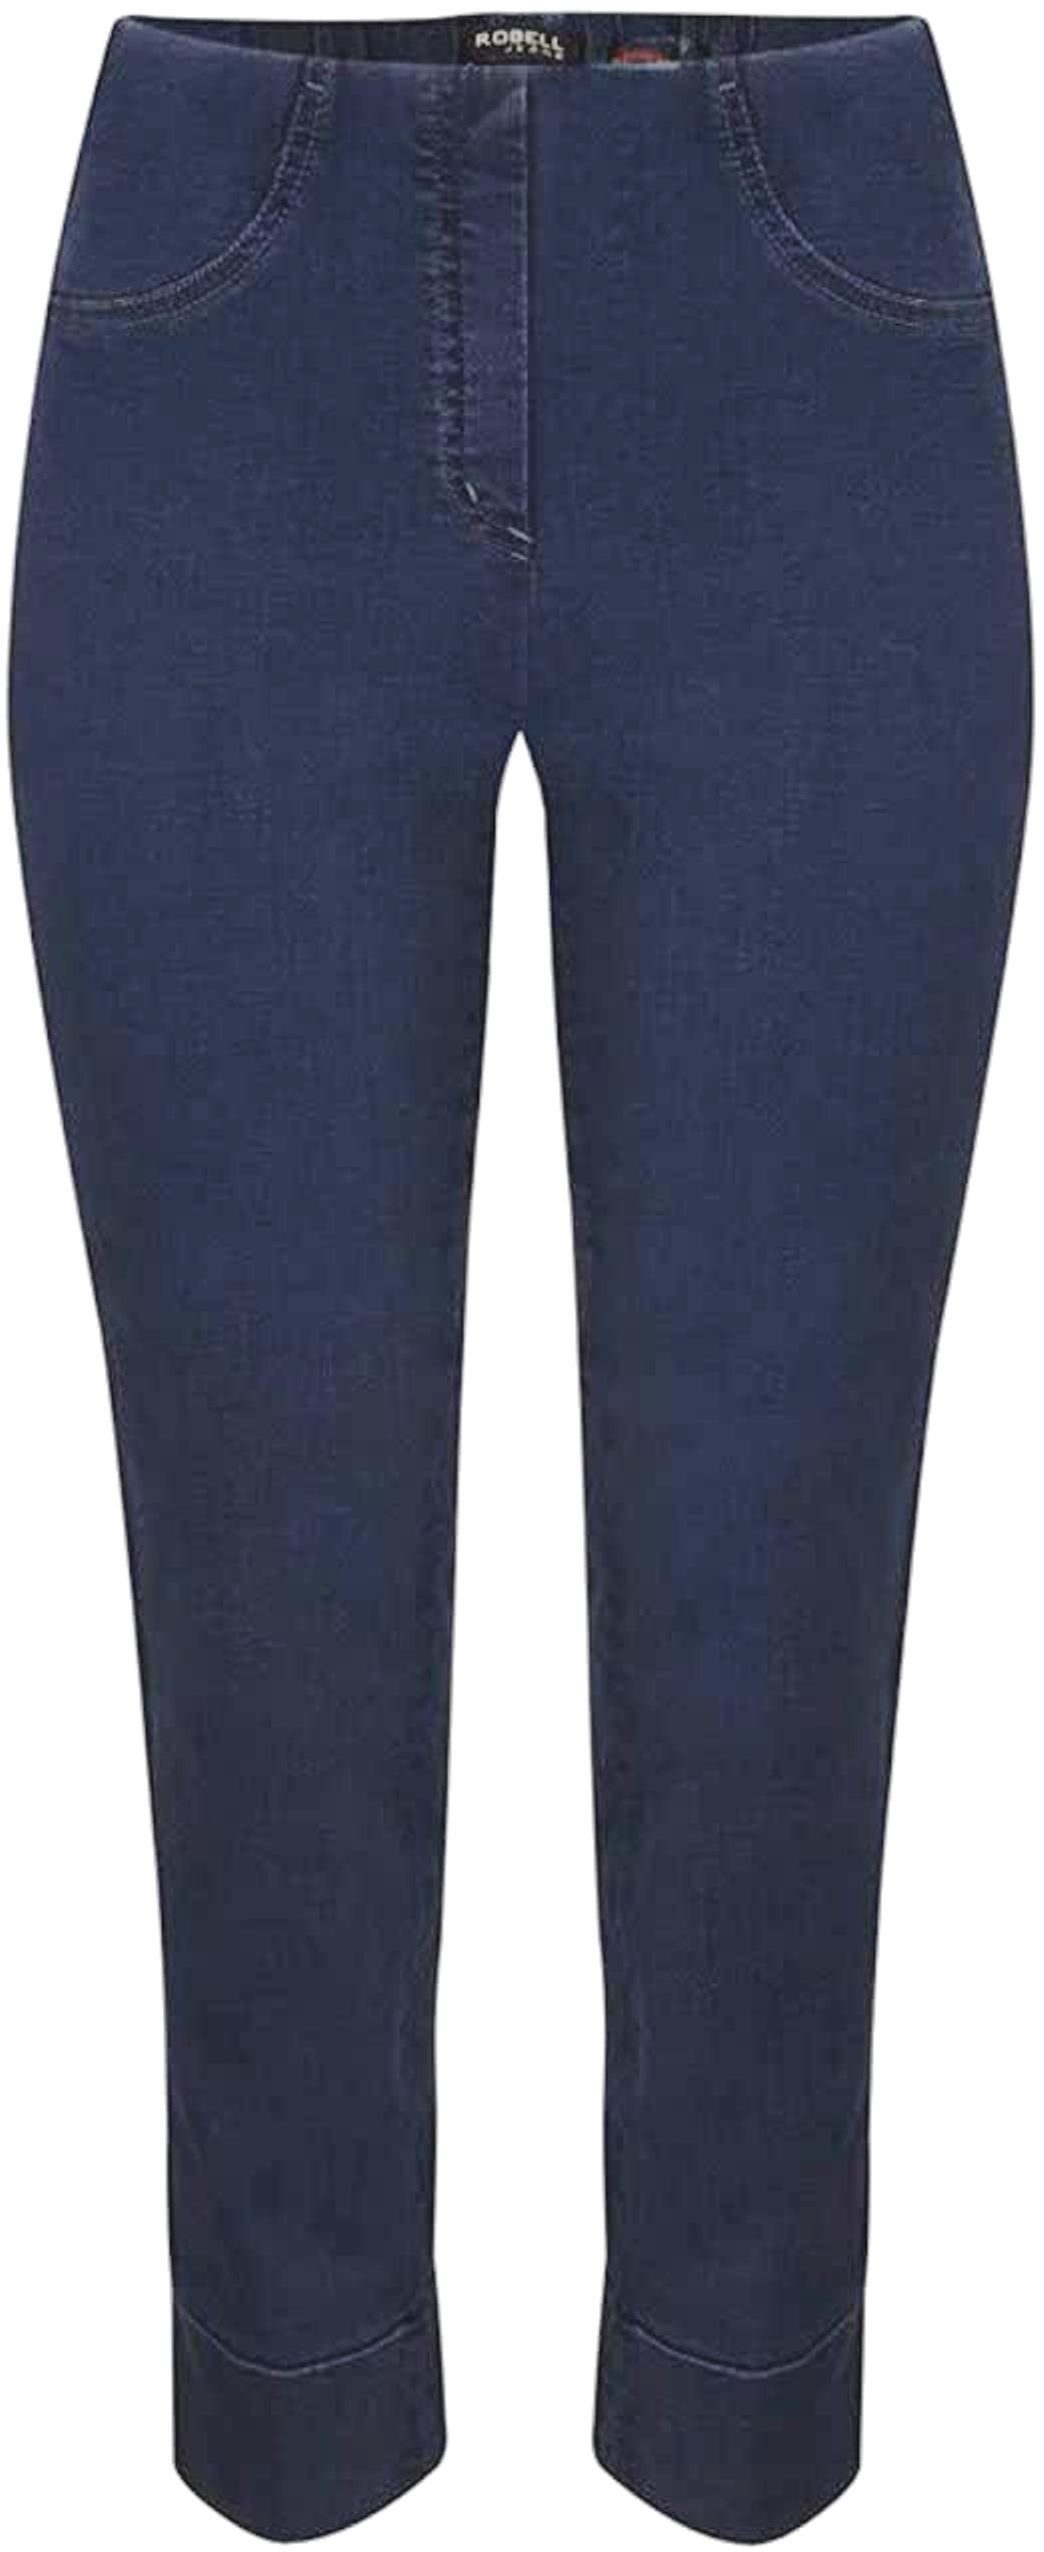 navy ROBELL Bella Stretchjeans 09 7/8-Jeans